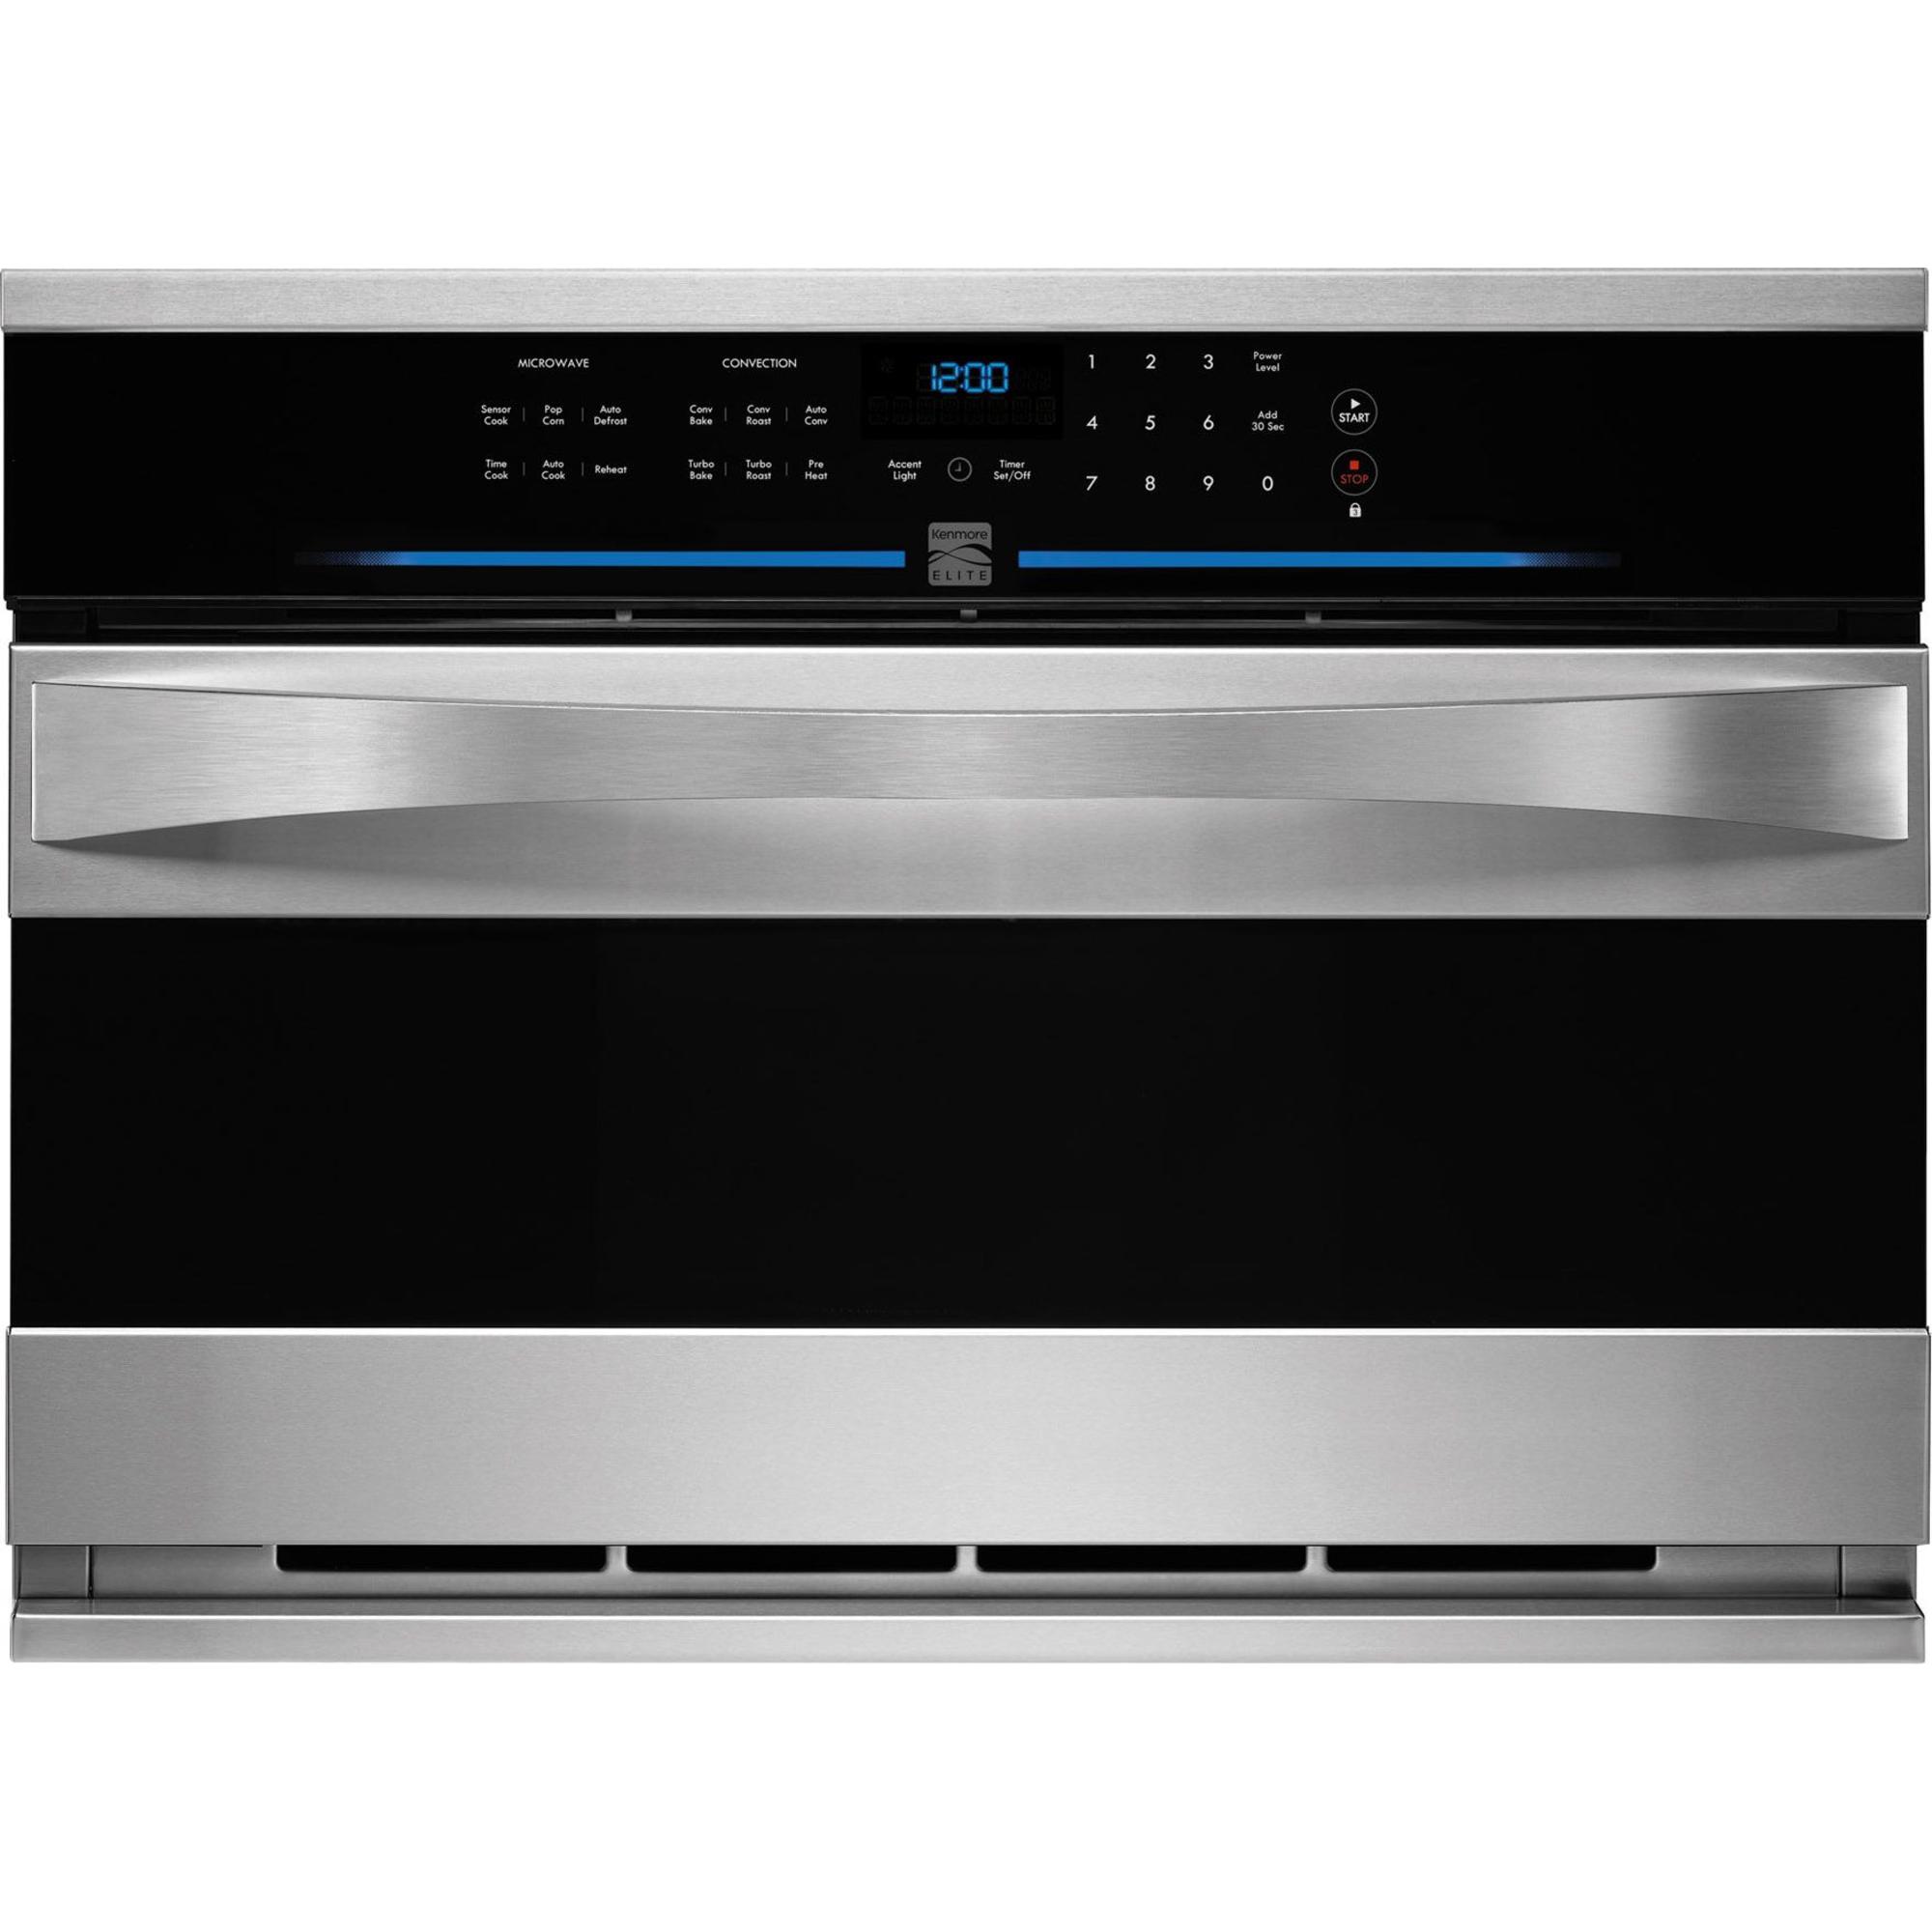 0012505562259 - 48883 30 BUILT-IN CONVECTION MICROWAVE